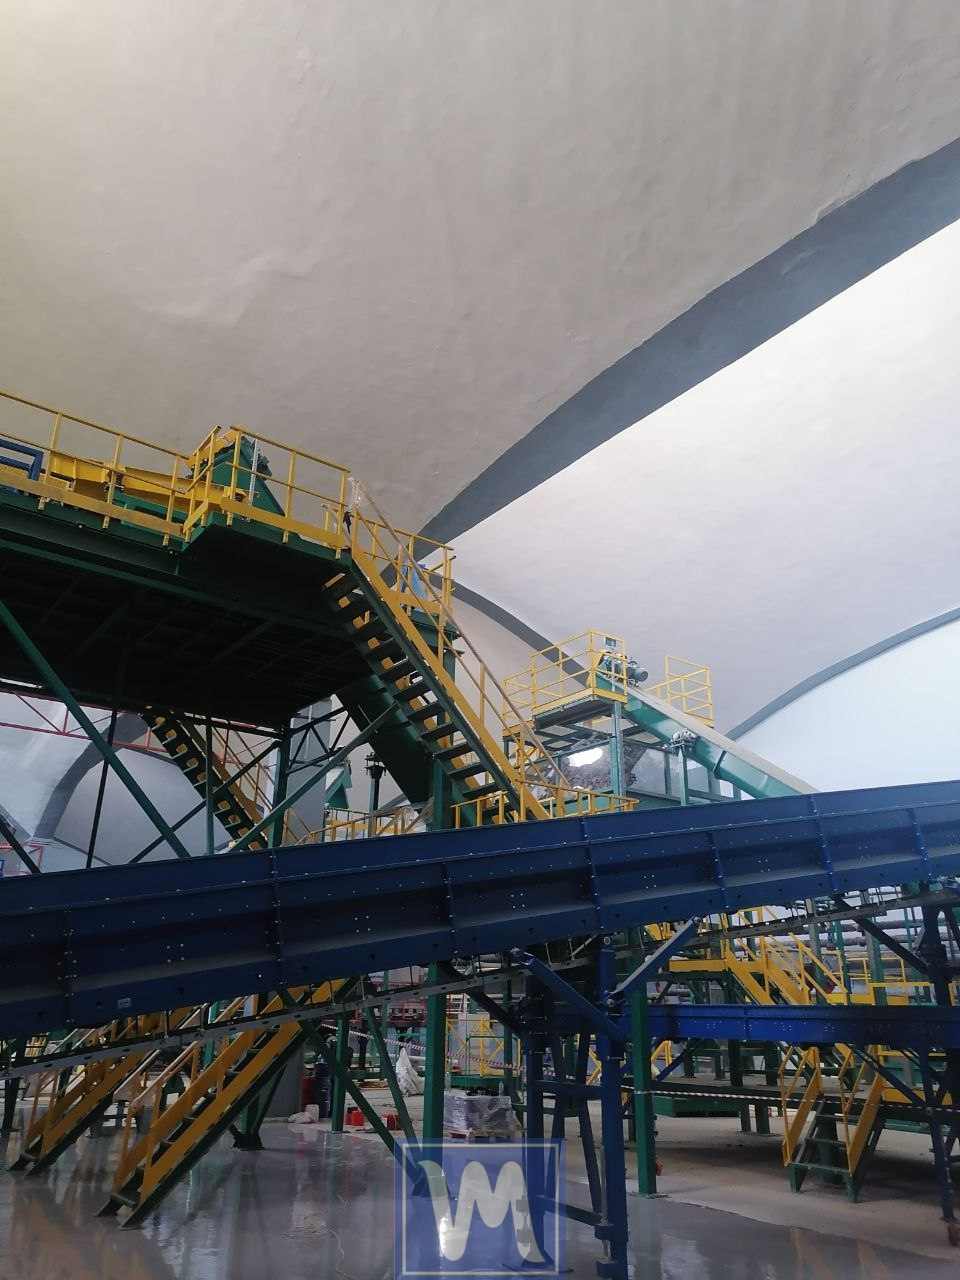 One of our esteemed clients operates a facility that designs and constructs waste sorting complexes, waste transshipment stations, and manufactures various equipment for sorting and recycling solid municipal waste. The facility spans a massive 14 hectares, boasting over 20,000 square meters of production area.